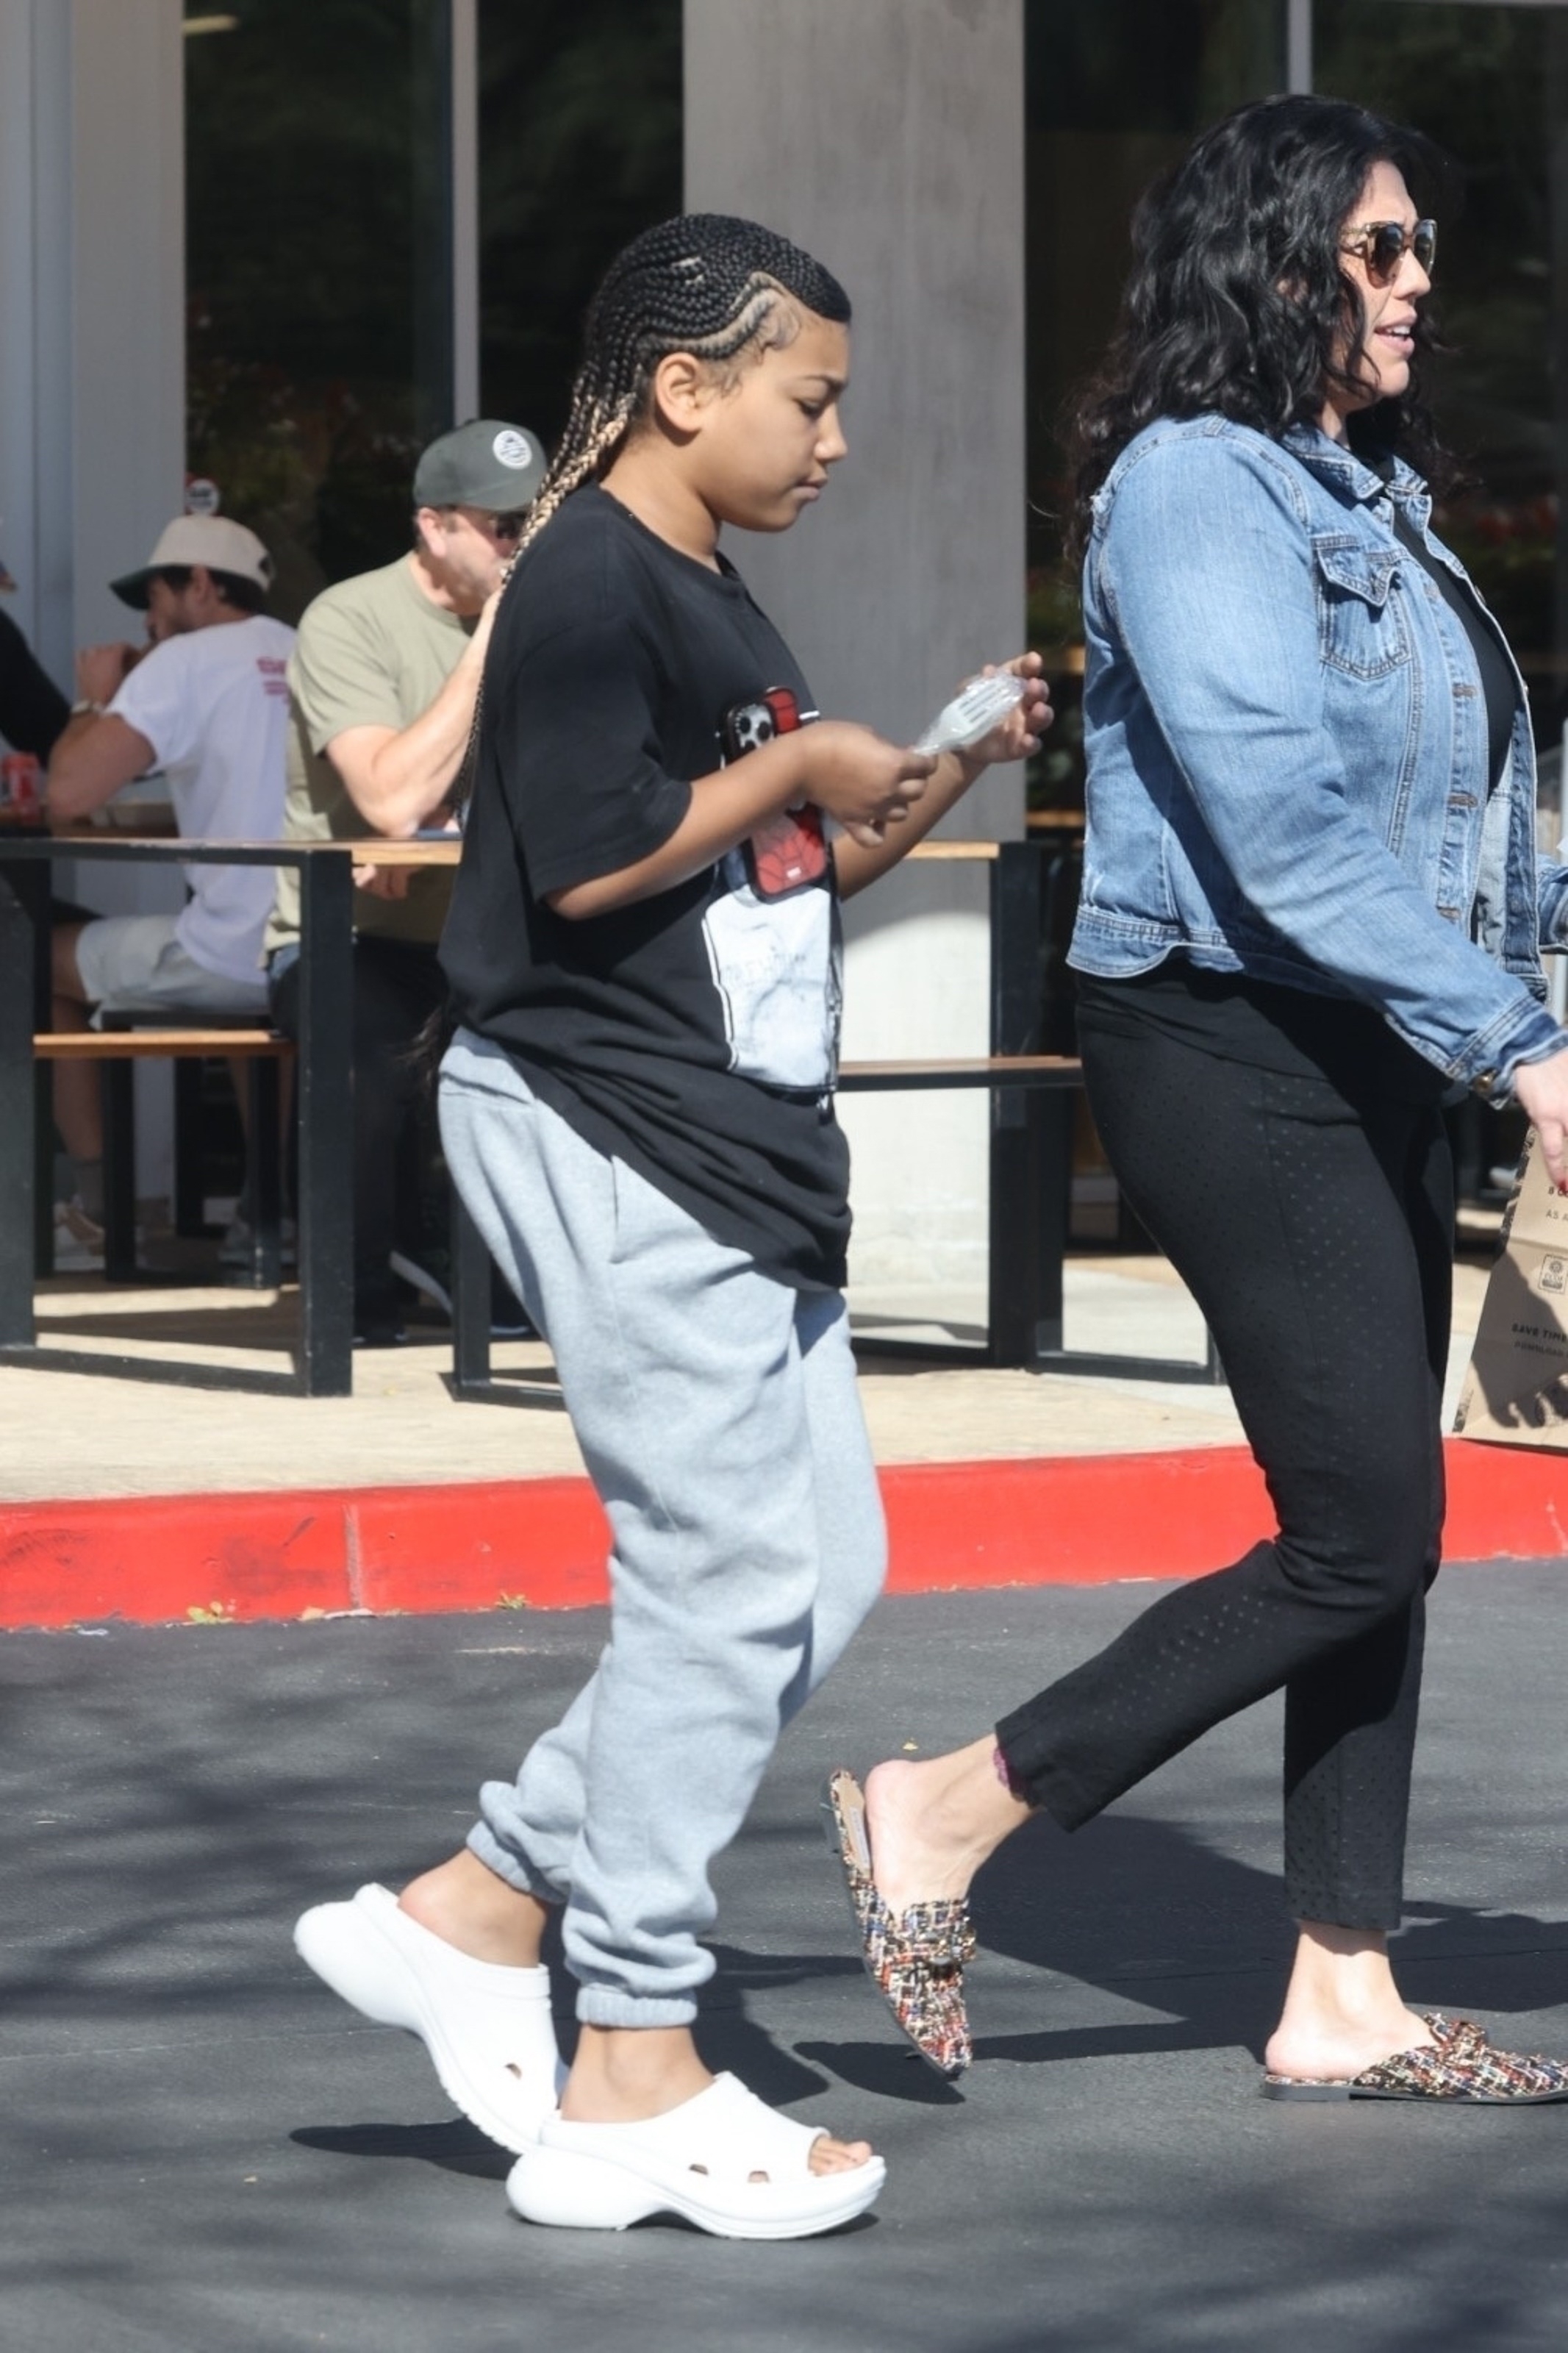 North debuted her new braided hair